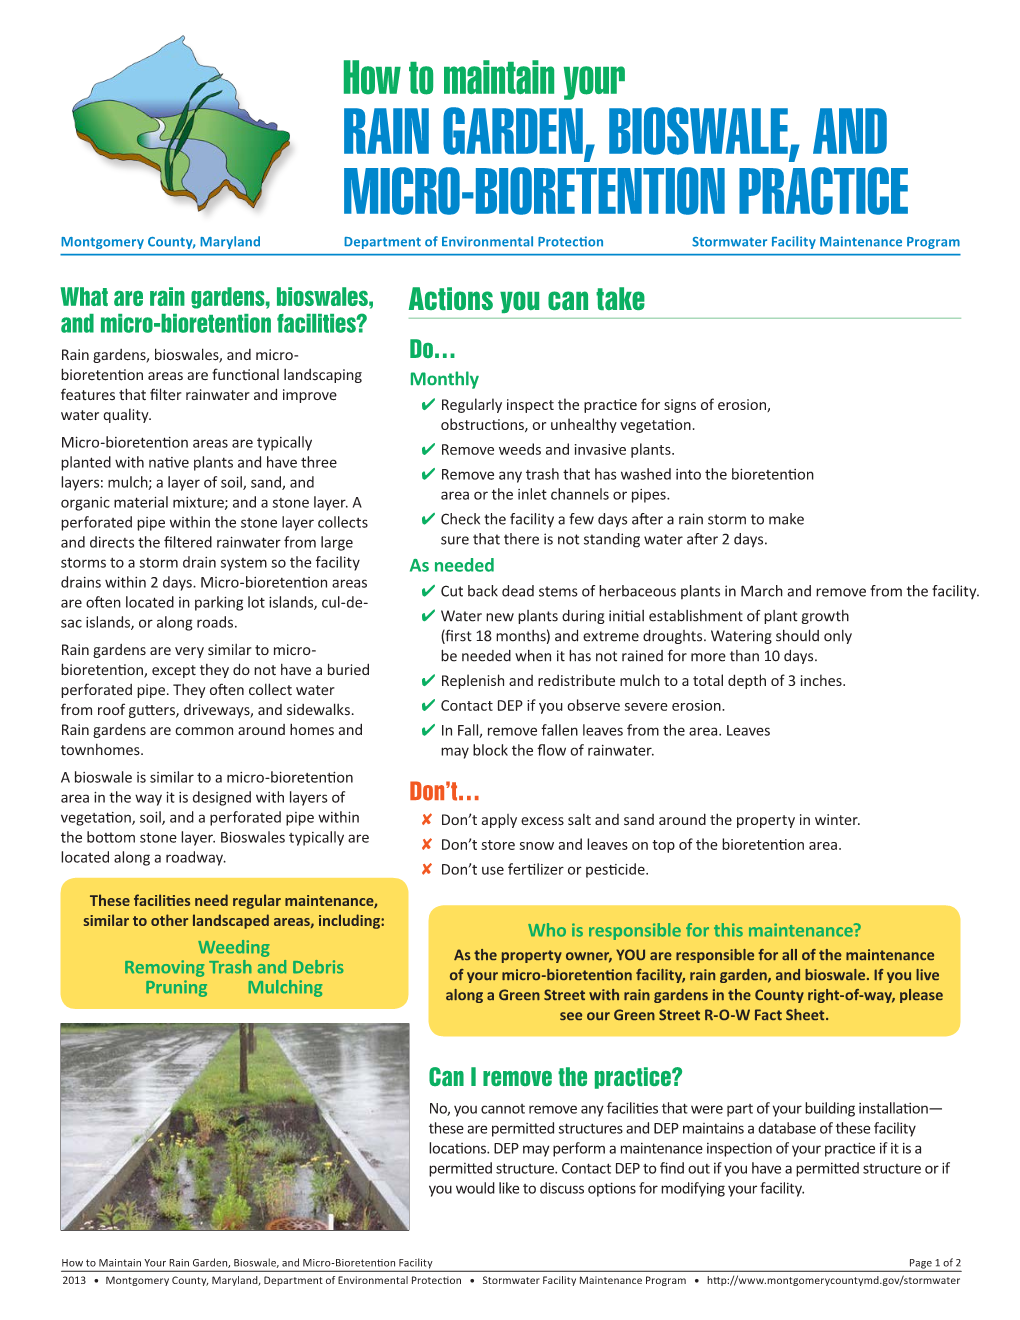 How to Maintain Your Rain Garden, Bioswale, and Micro-Bioretention